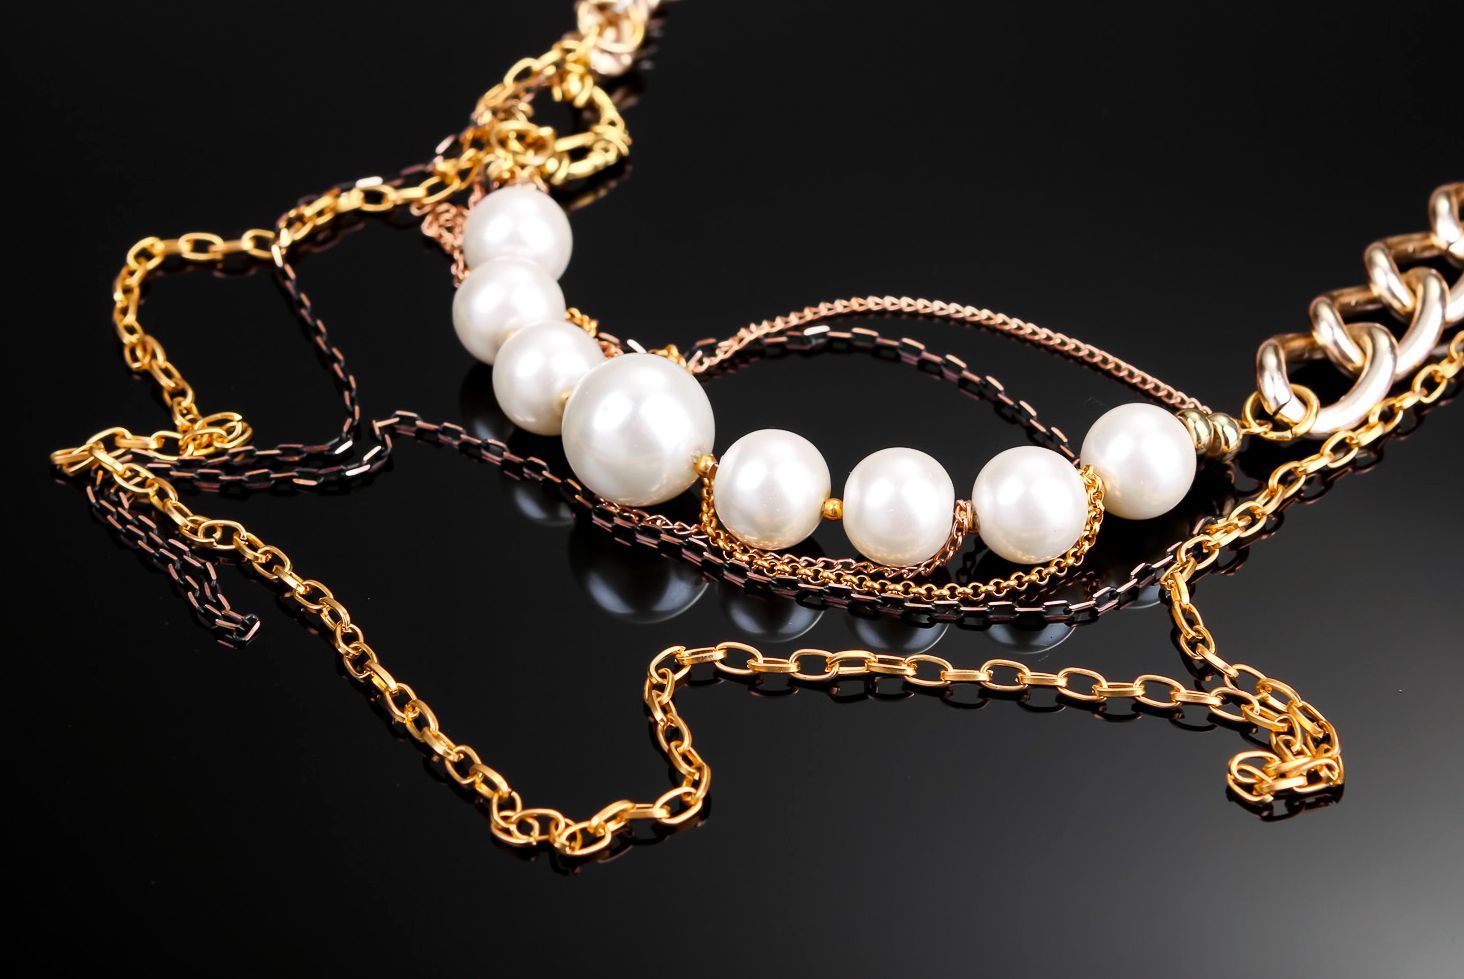 Necklace with ceramic pearls, handmade photo 1